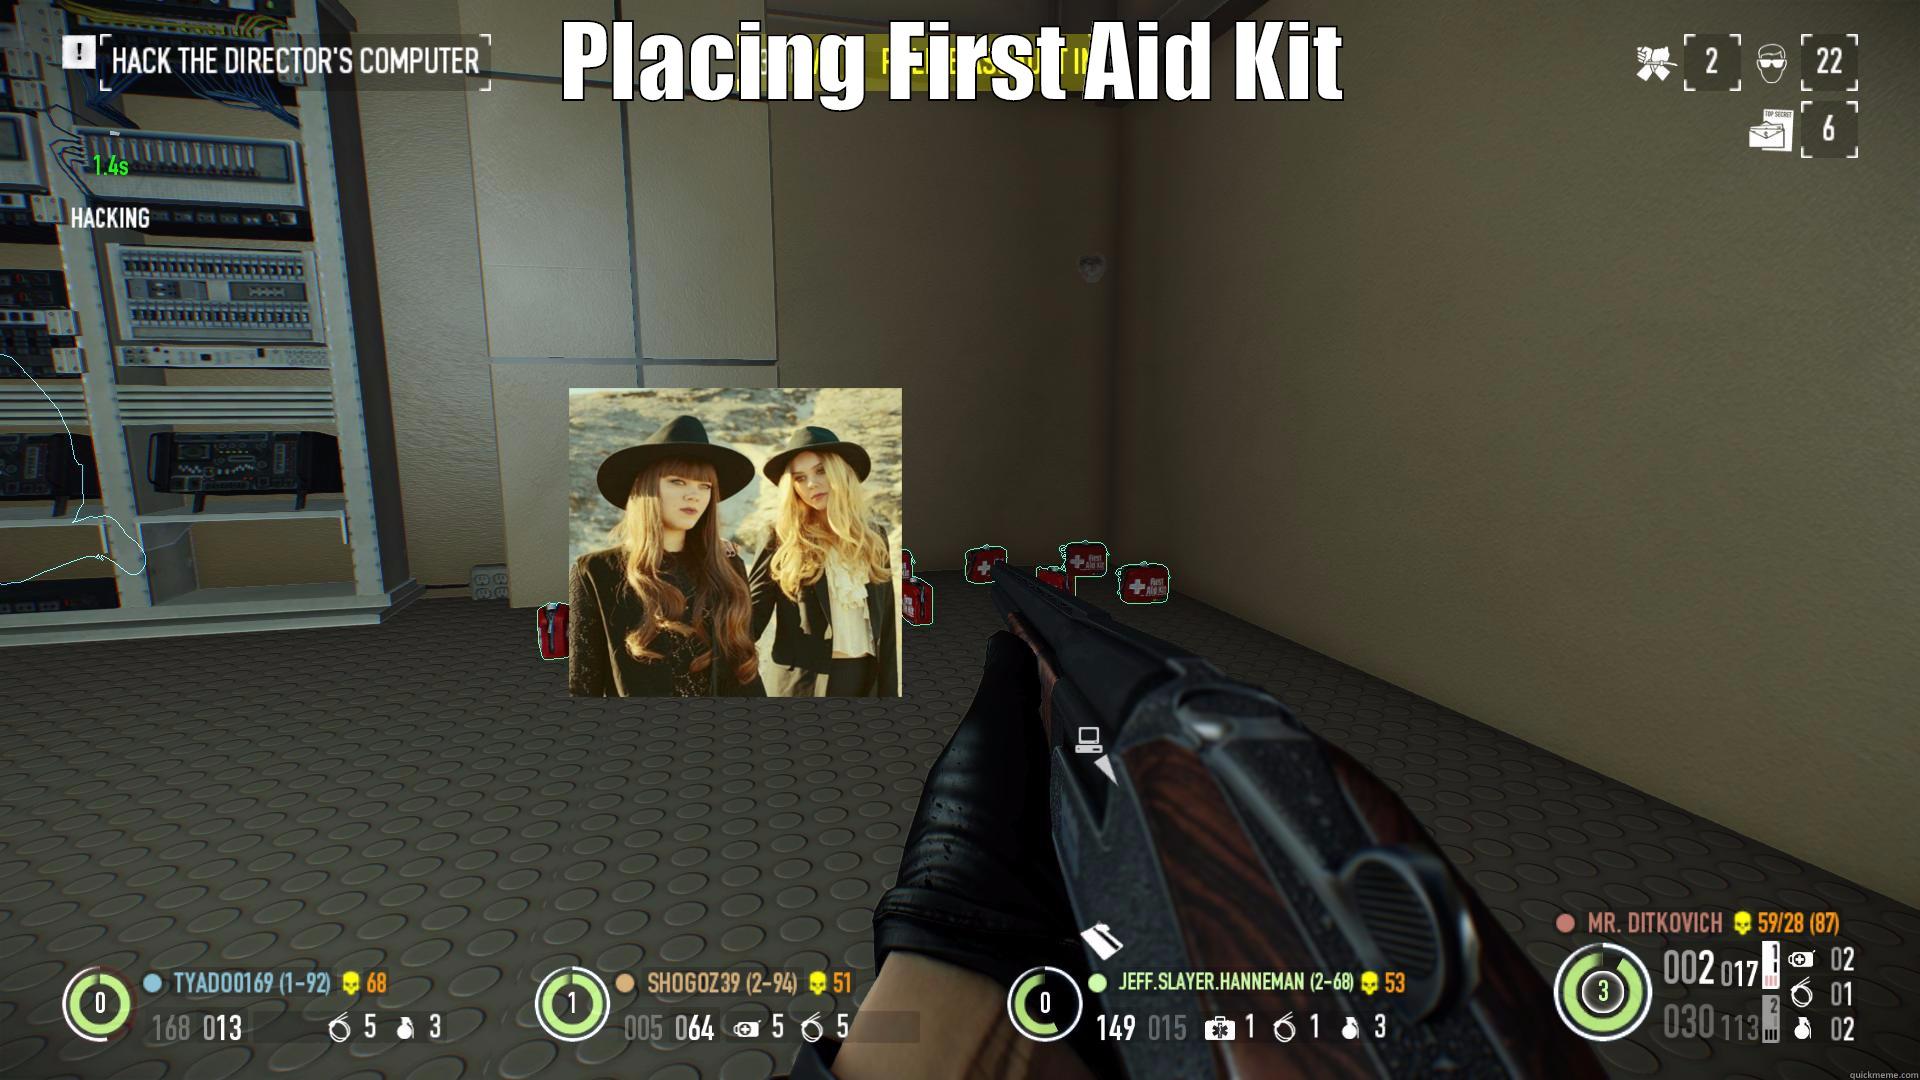 Payday 2 - Placing First Aid Kit! - PLACING FIRST AID KIT  Misc